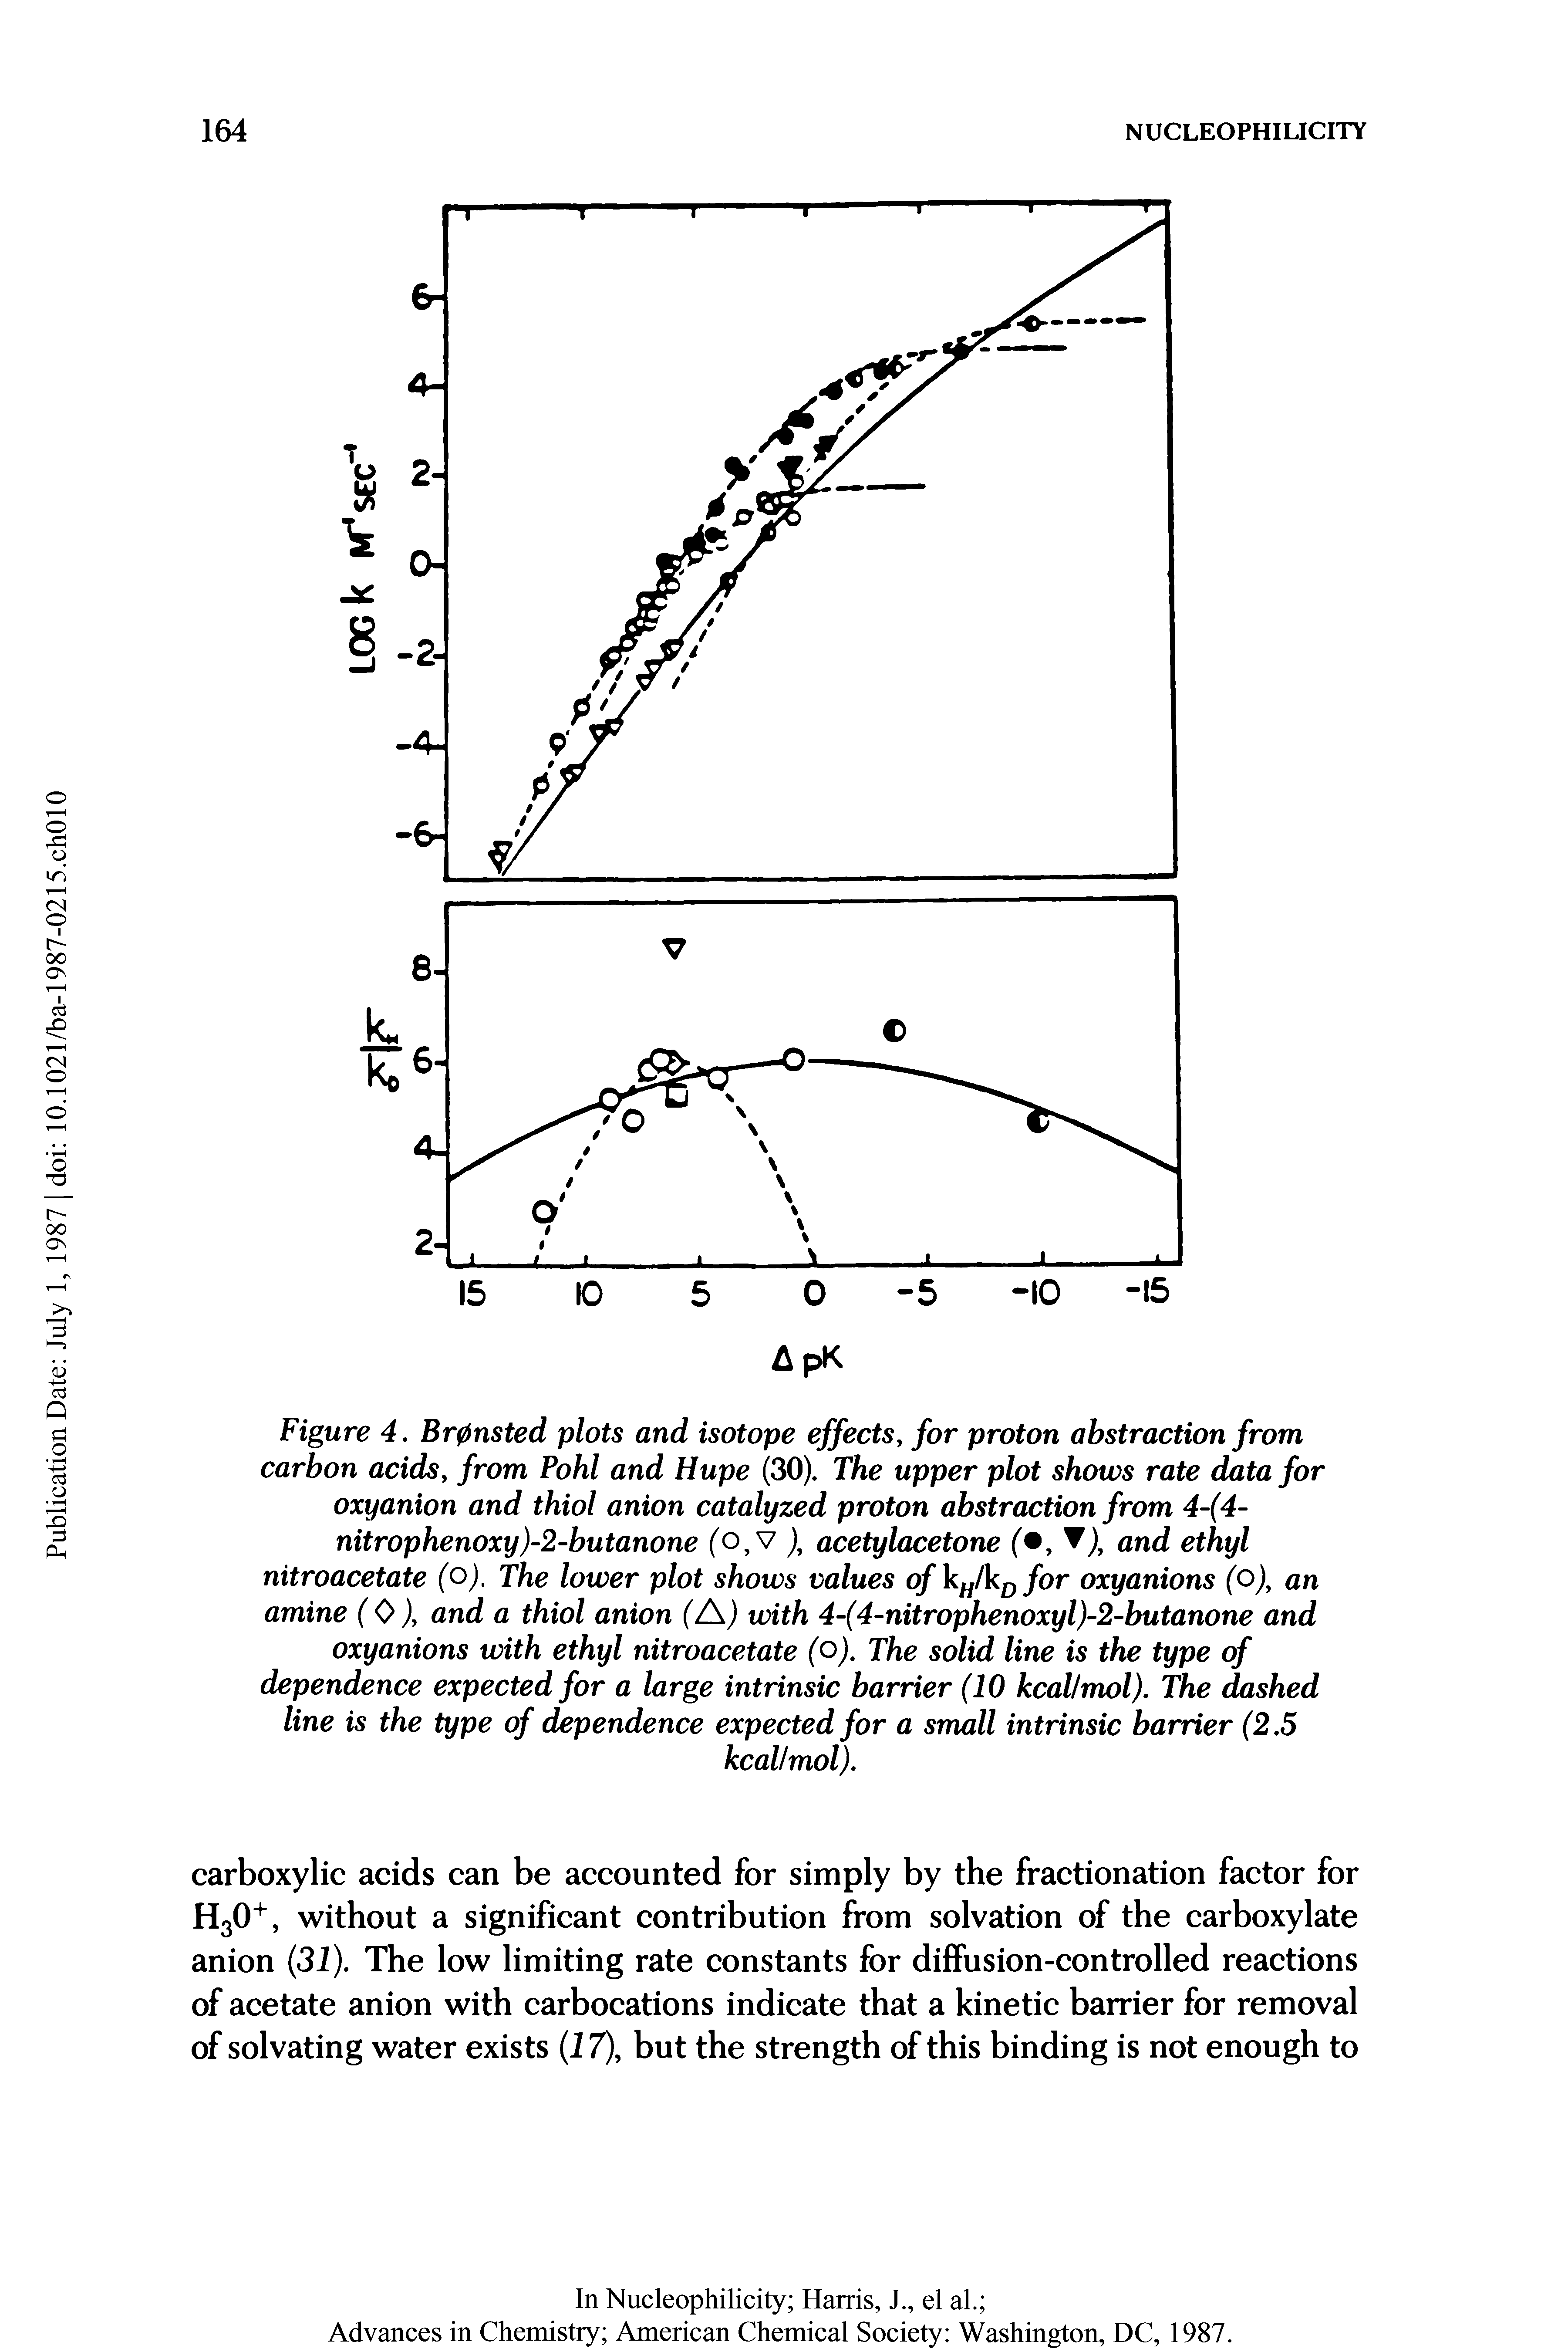 Figure 4. Br0nsted plots and isotope effects, for proton abstraction from carbon acids, from Pohl and Hupe (30). The upper plot shows rate data for oxyanion and thiol anion catalyzed proton abstraction from 4-(4-nitrophenoxy)-2-butanone (o,v )t acetylacetone and ethyl...